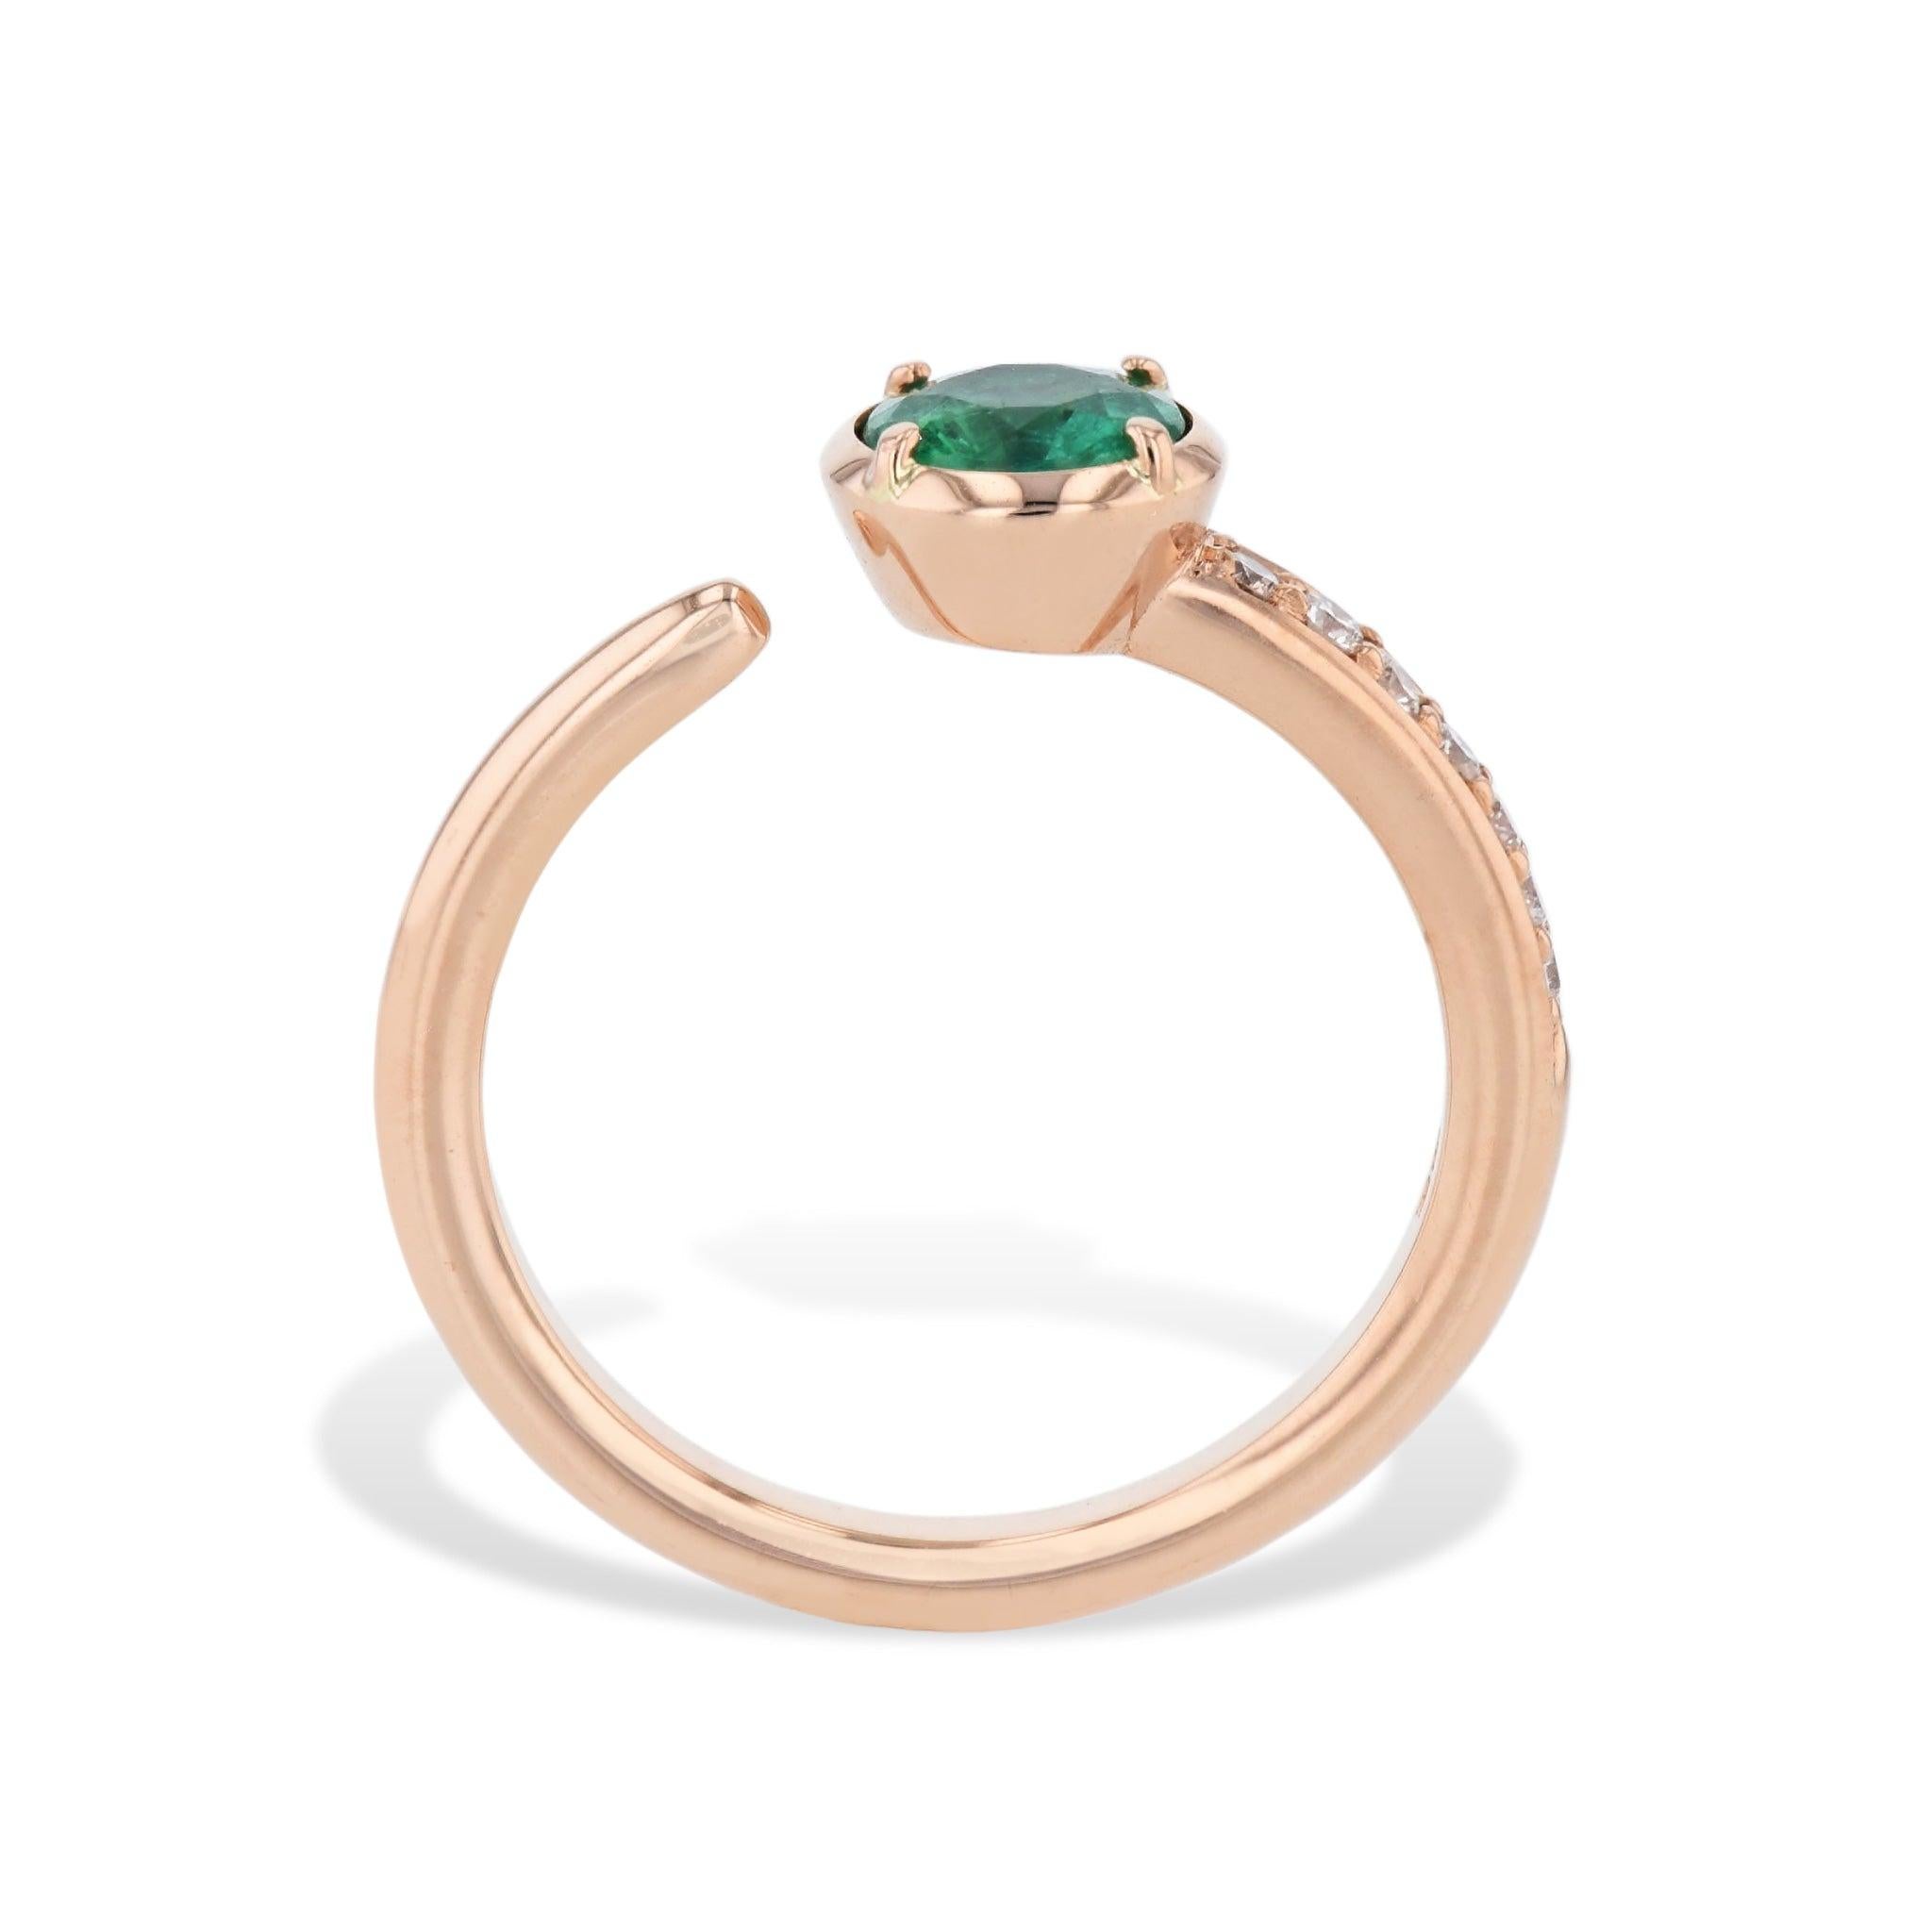 Indulge in the effortless beauty of our Zambian Emerald and Pave Diamond Open Ring. Crafted from 18 karat rose gold, this dazzling piece features a round Zambian emerald paired with pave diamonds. Pave-mounted diamonds on one side of the shank and